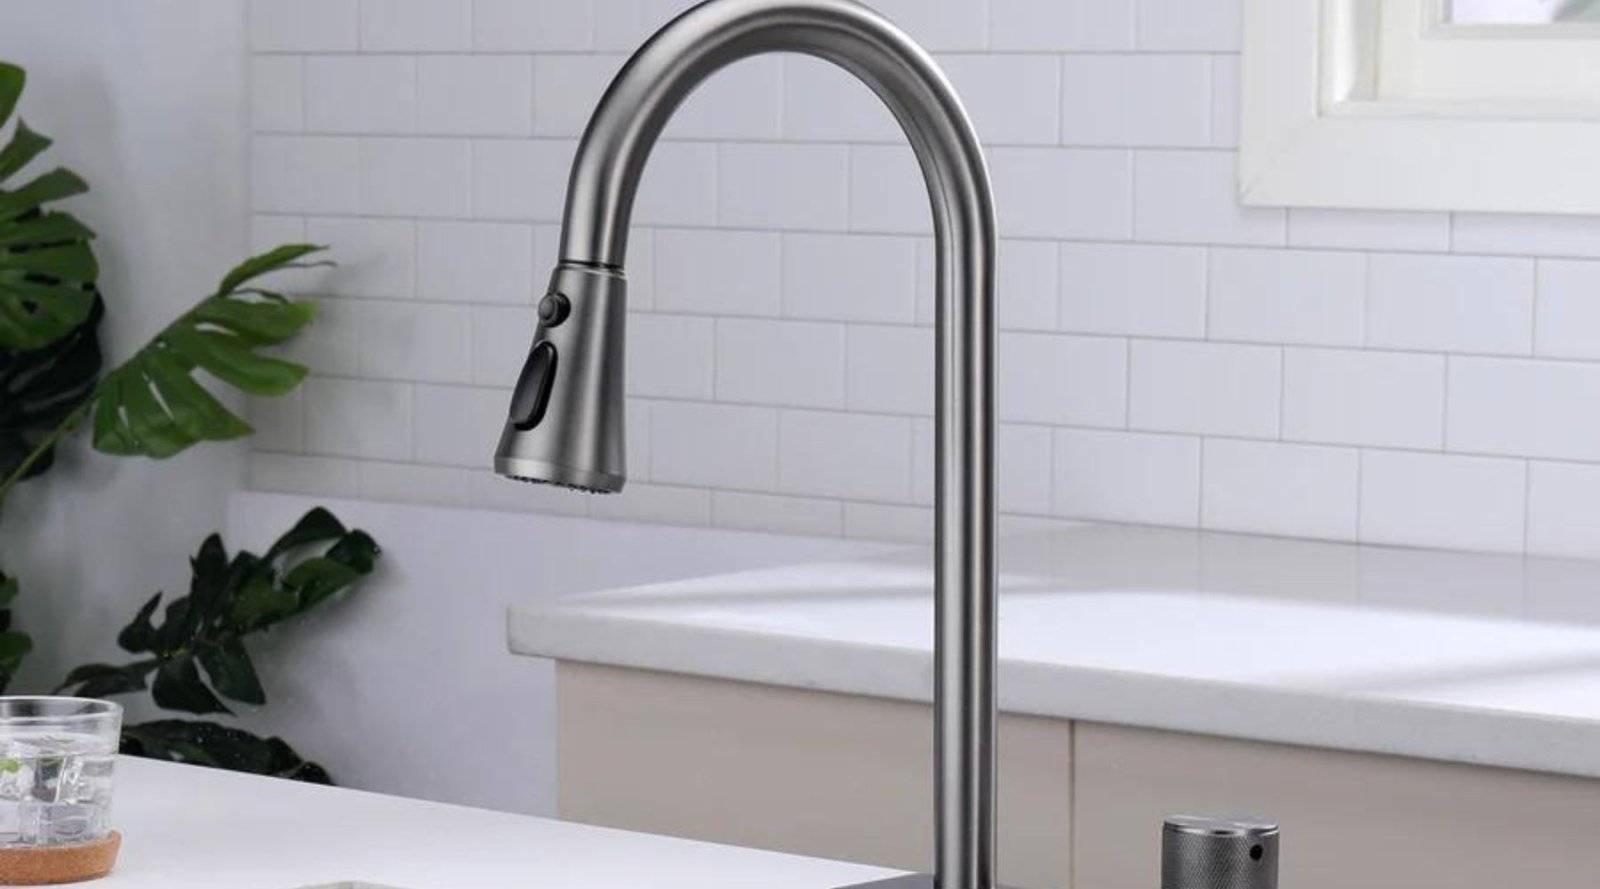 How to Clean a Pull Down Kitchen Faucet and Spray Head? - Lefton Home